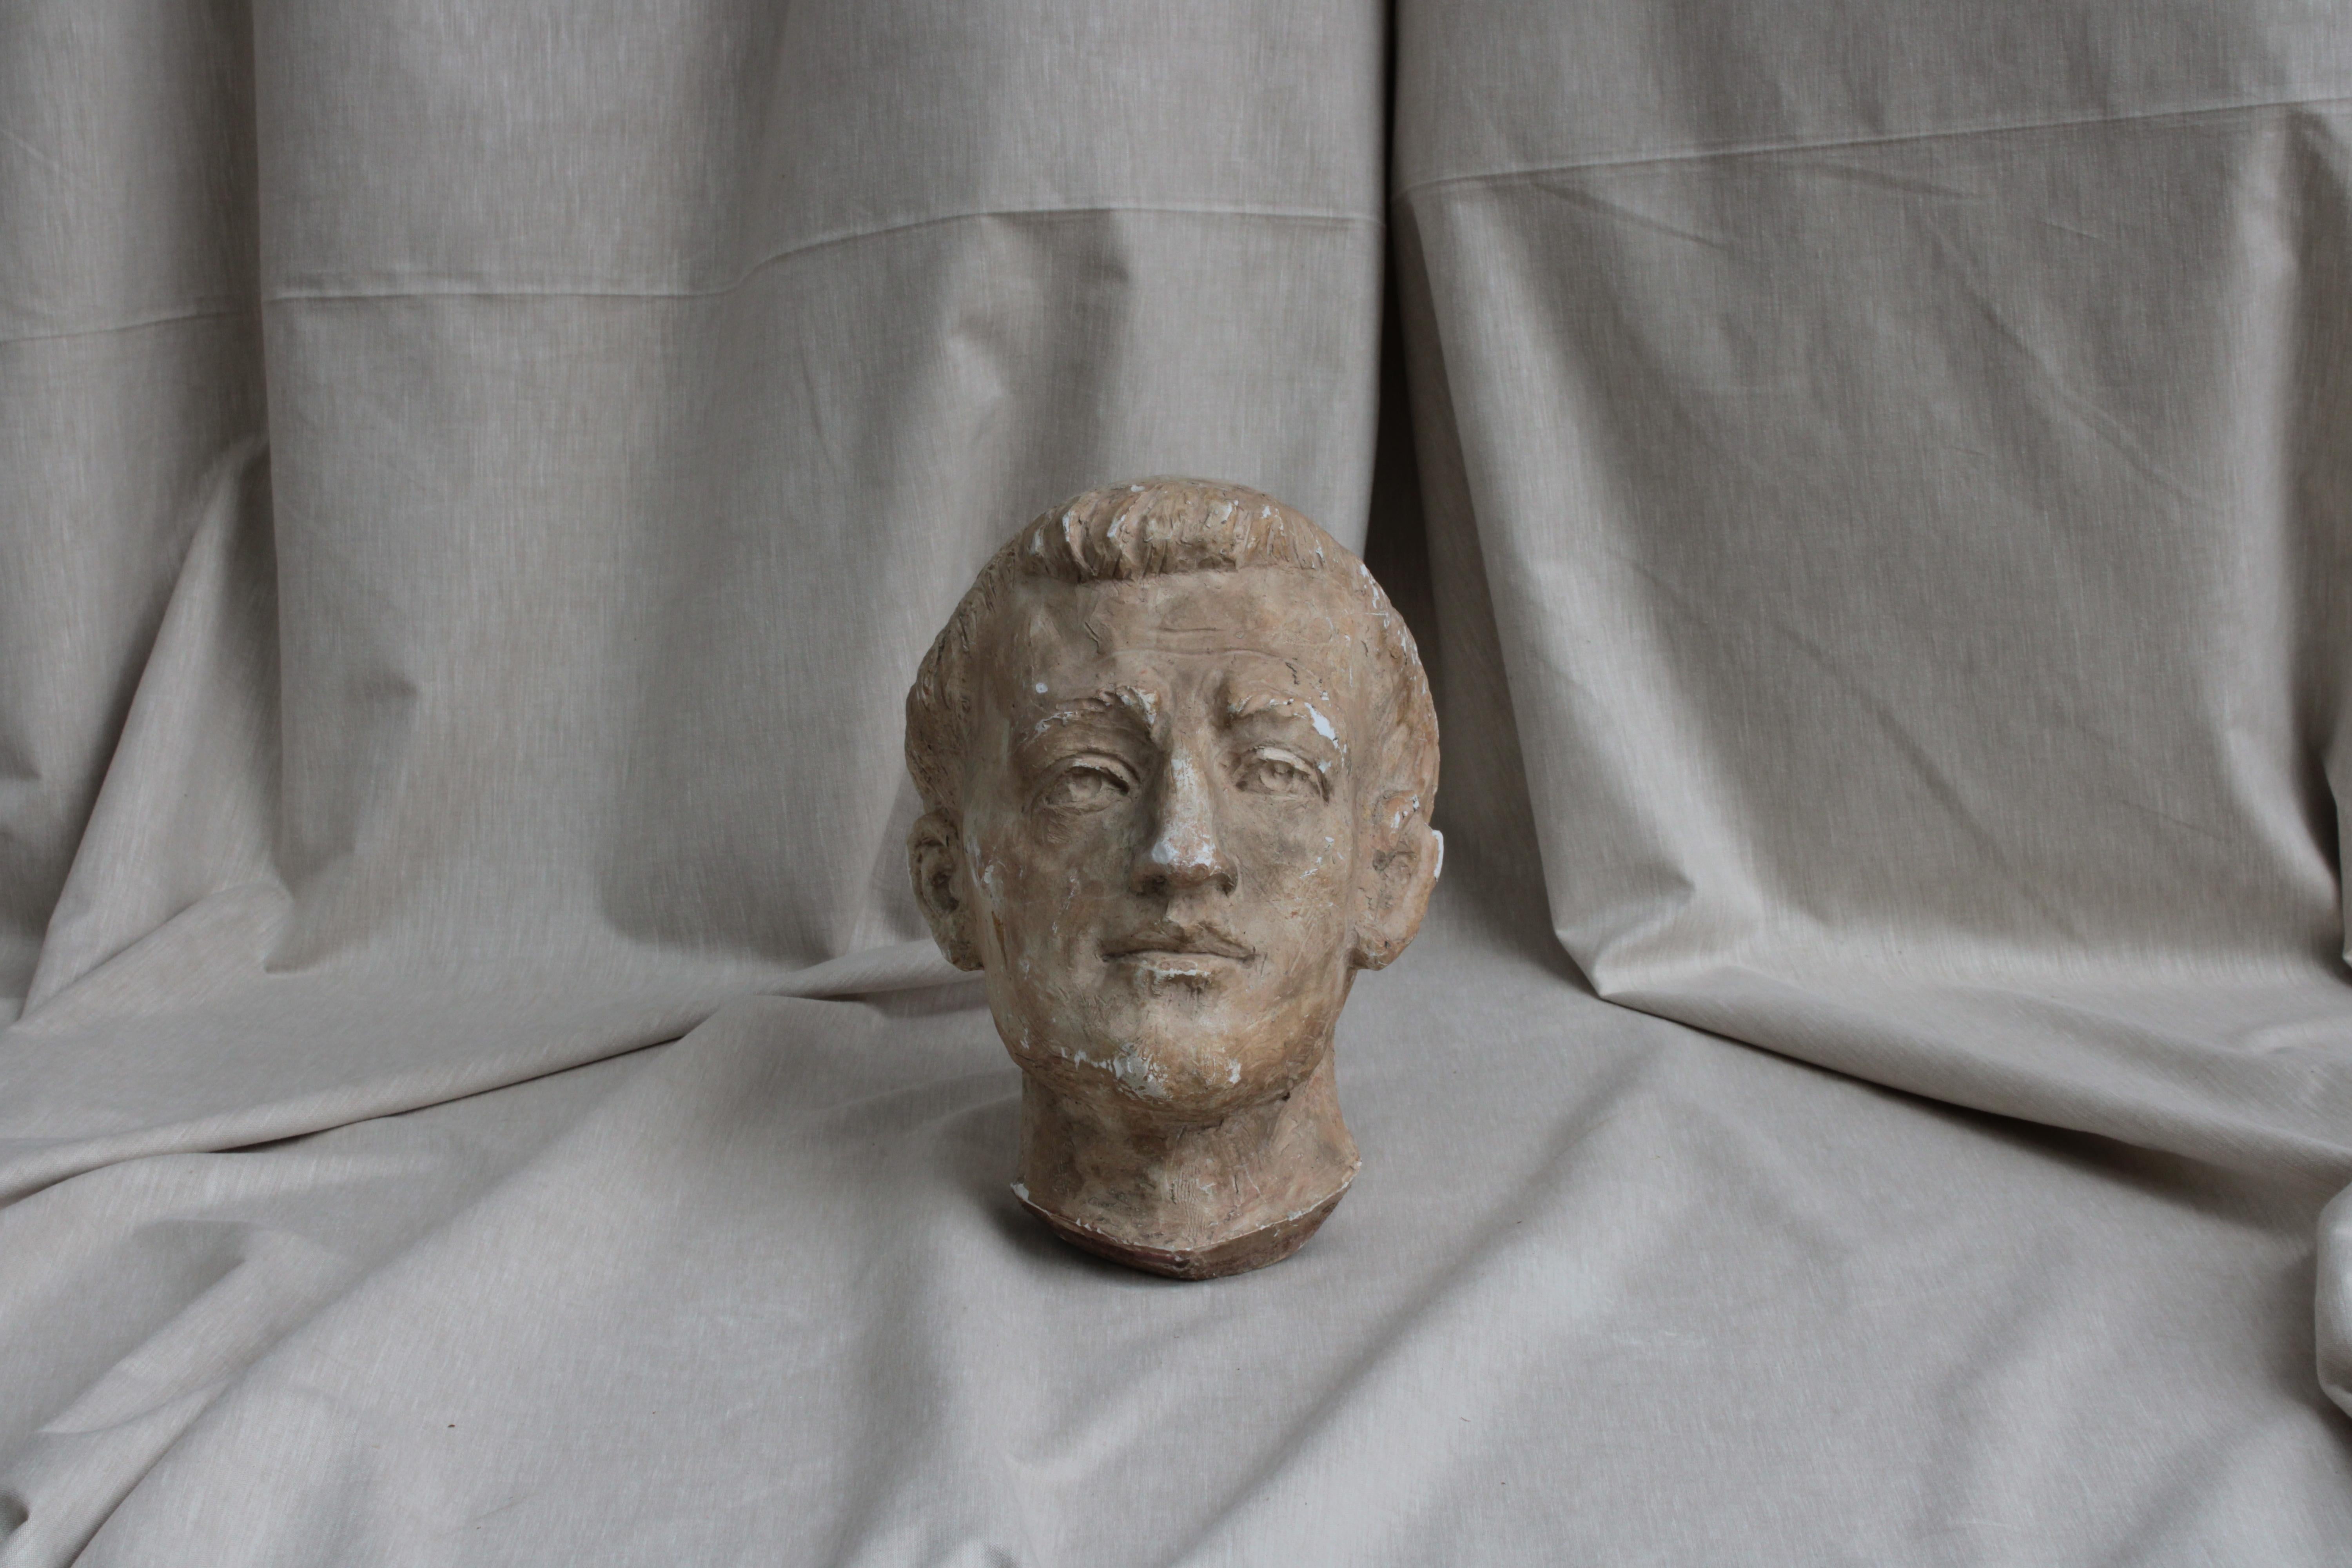 A male head study from the twentieth-century, in patinated plaster, possibly depicting a head of a friar, or a Saint.
Patinated plaster sculpture is a process in which plaster is applied and sculpted to create the desired shape, and then a patina